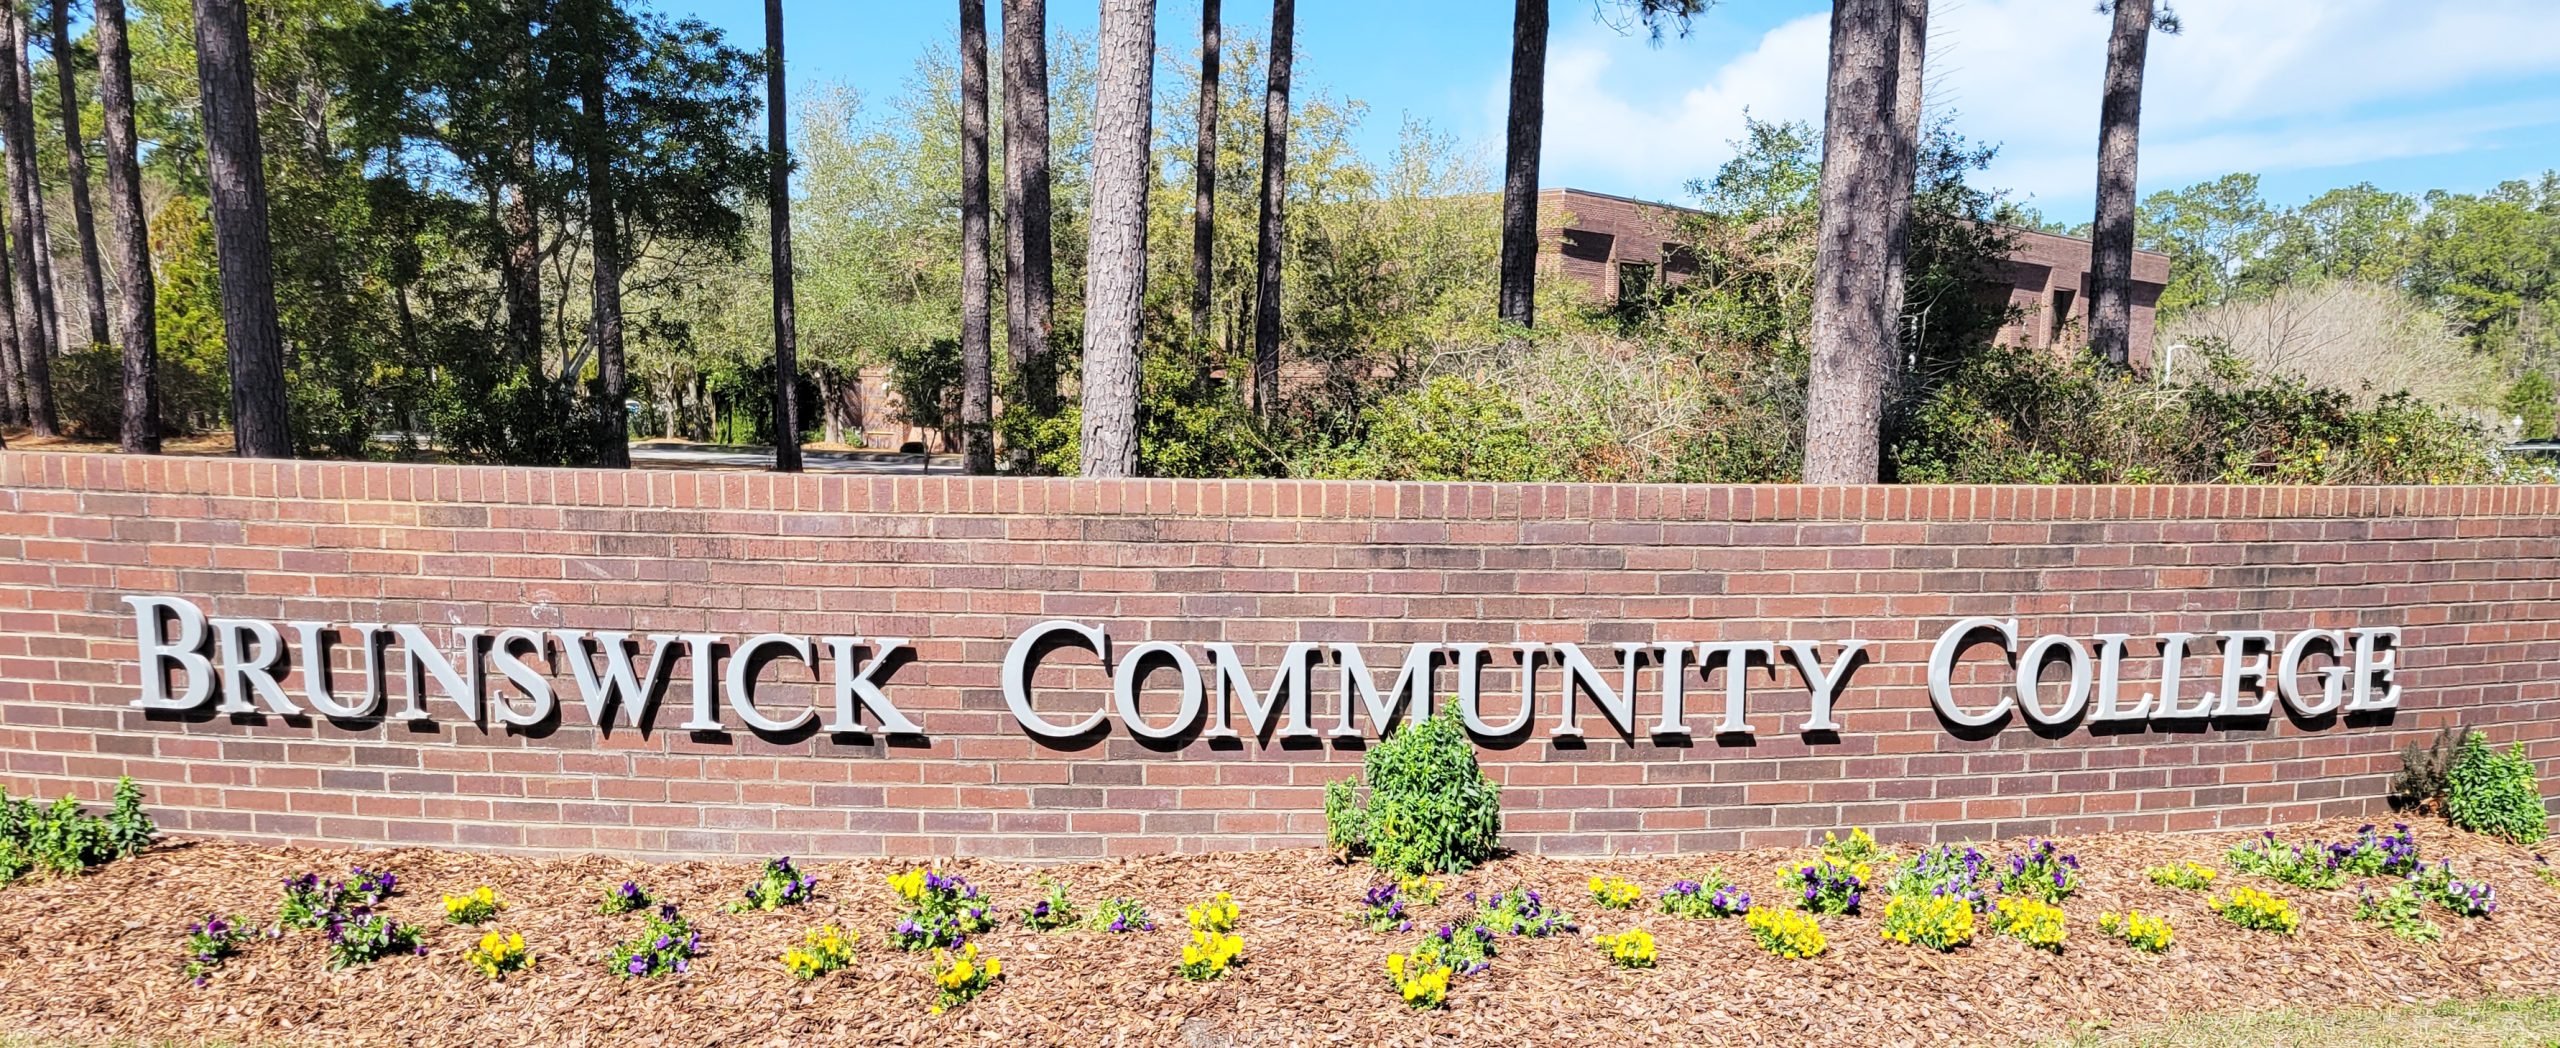 Brunswick Community College sign at entrance of main campus